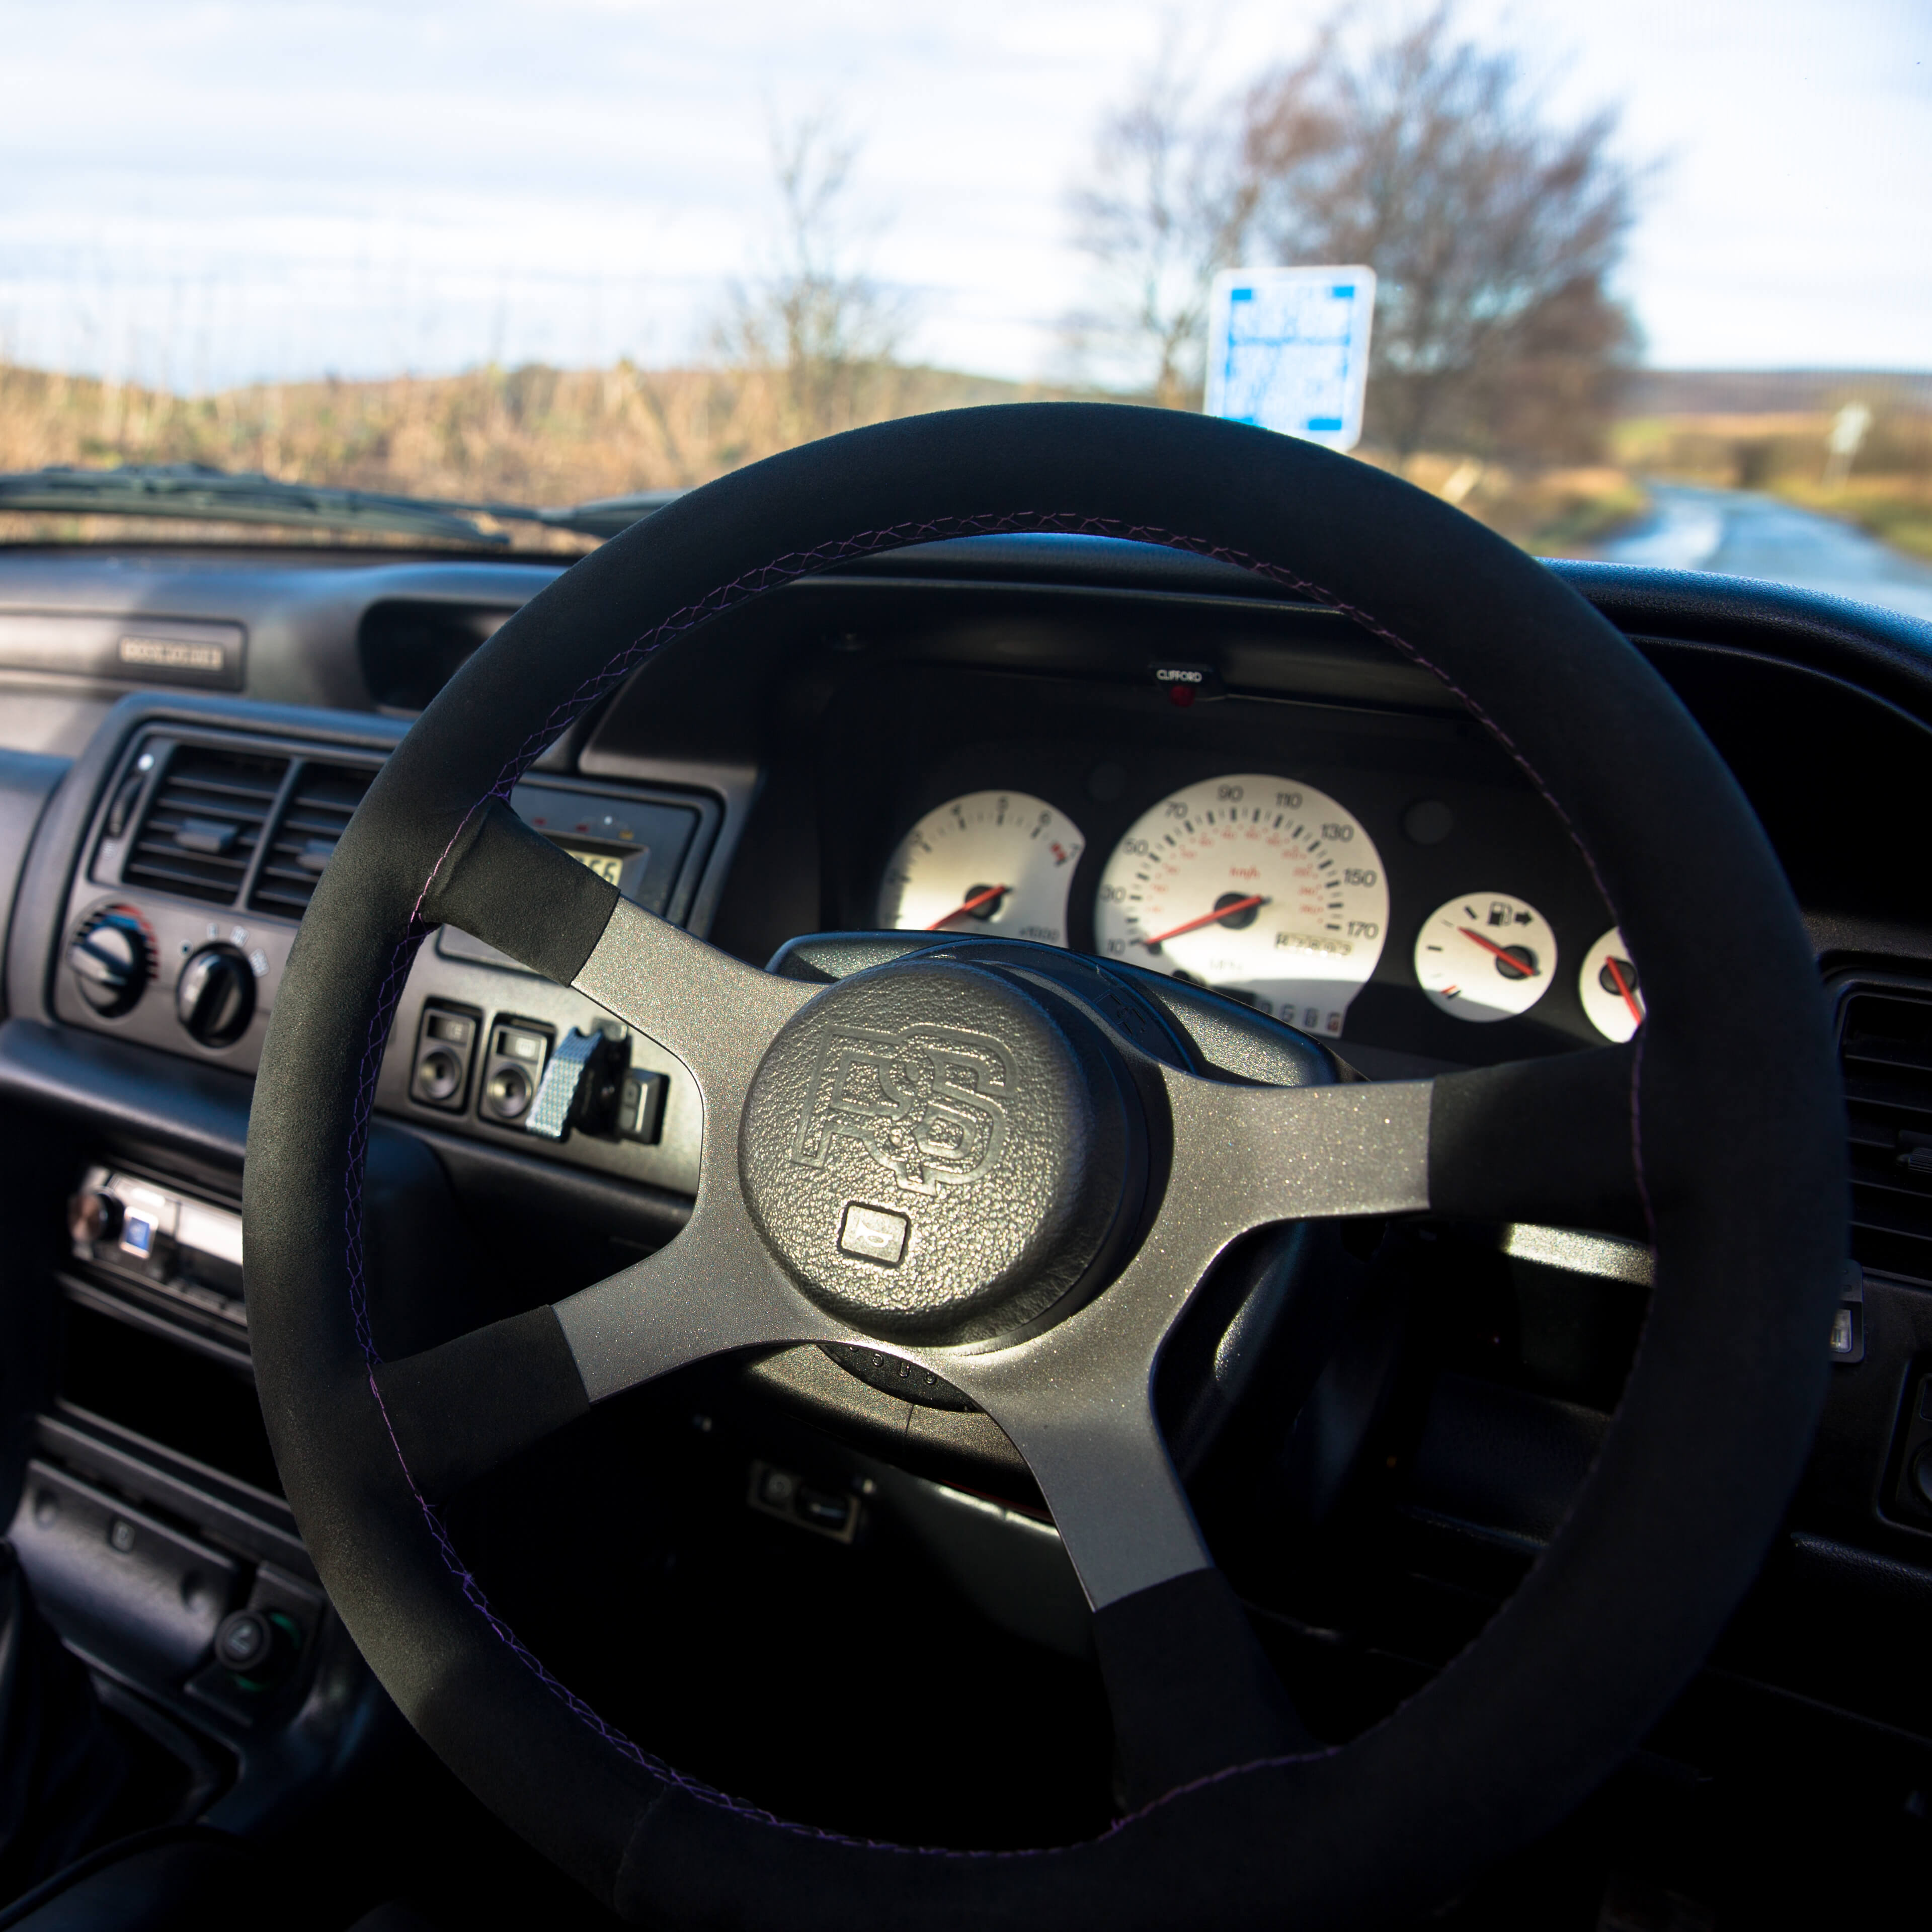 Escort RS Cosworth steering wheel and dashboard with view out of the front windscreen